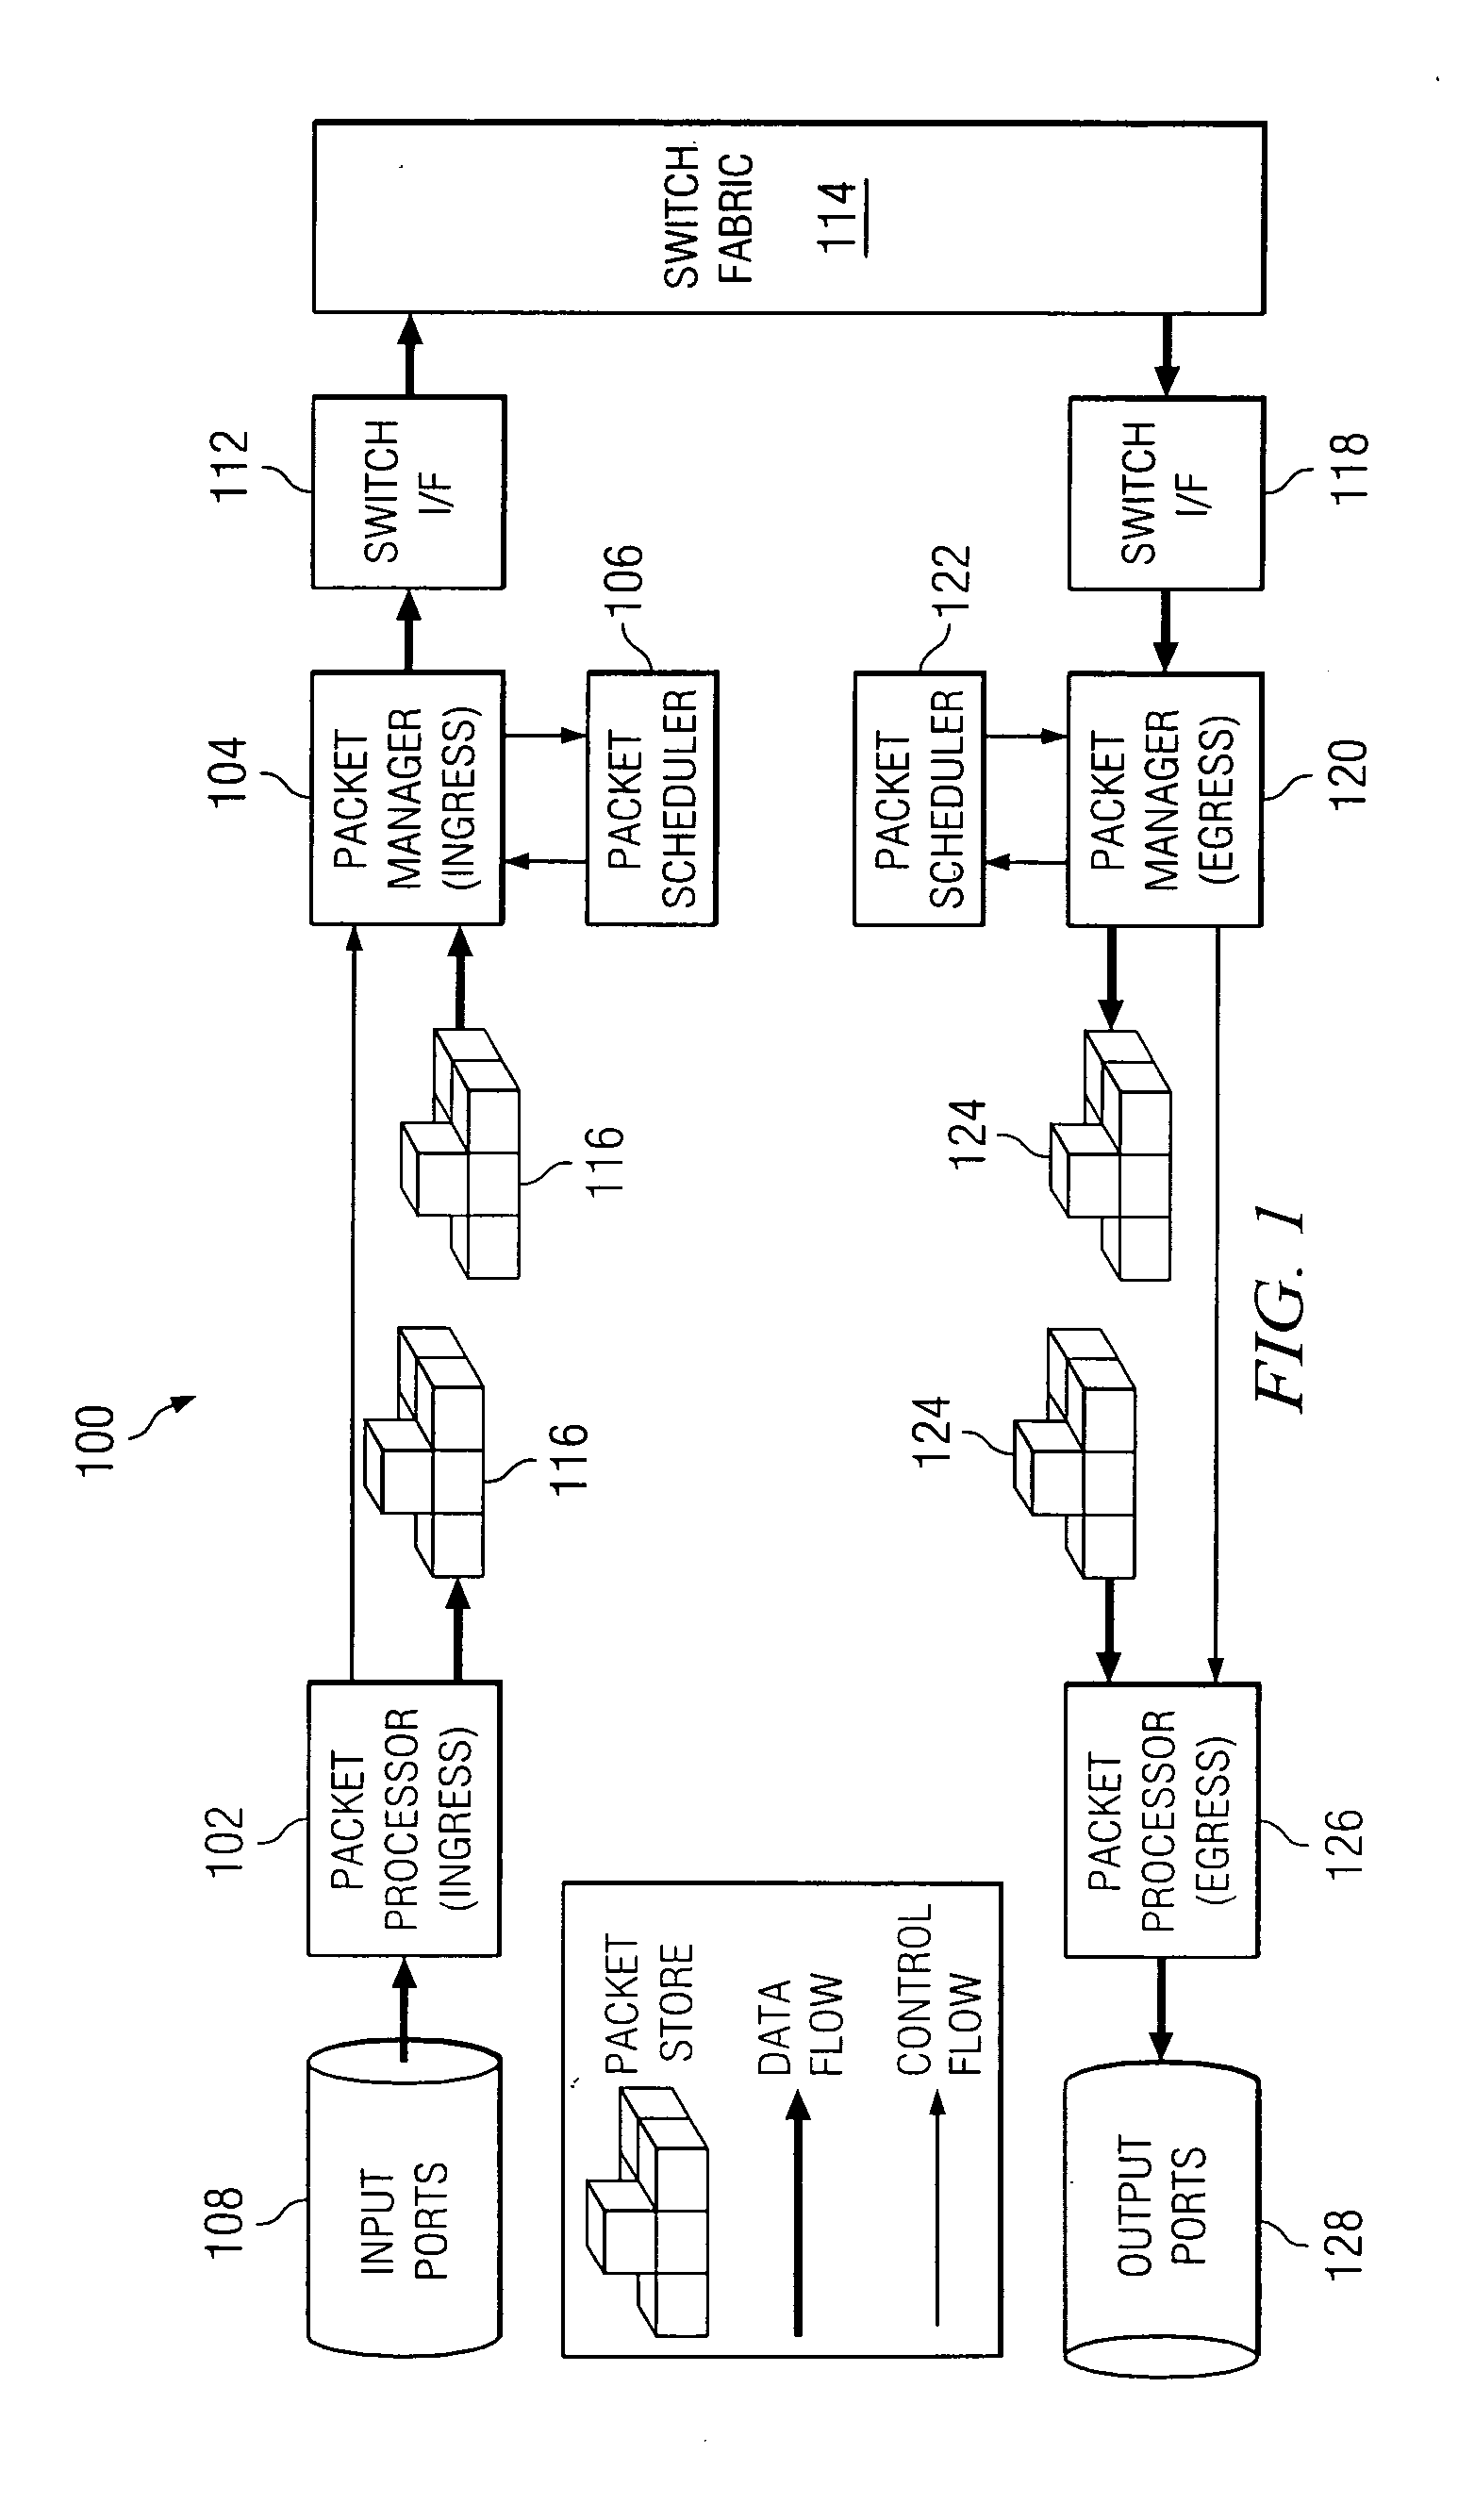 Apparatus and methods for scheduling packets in a broadband data stream